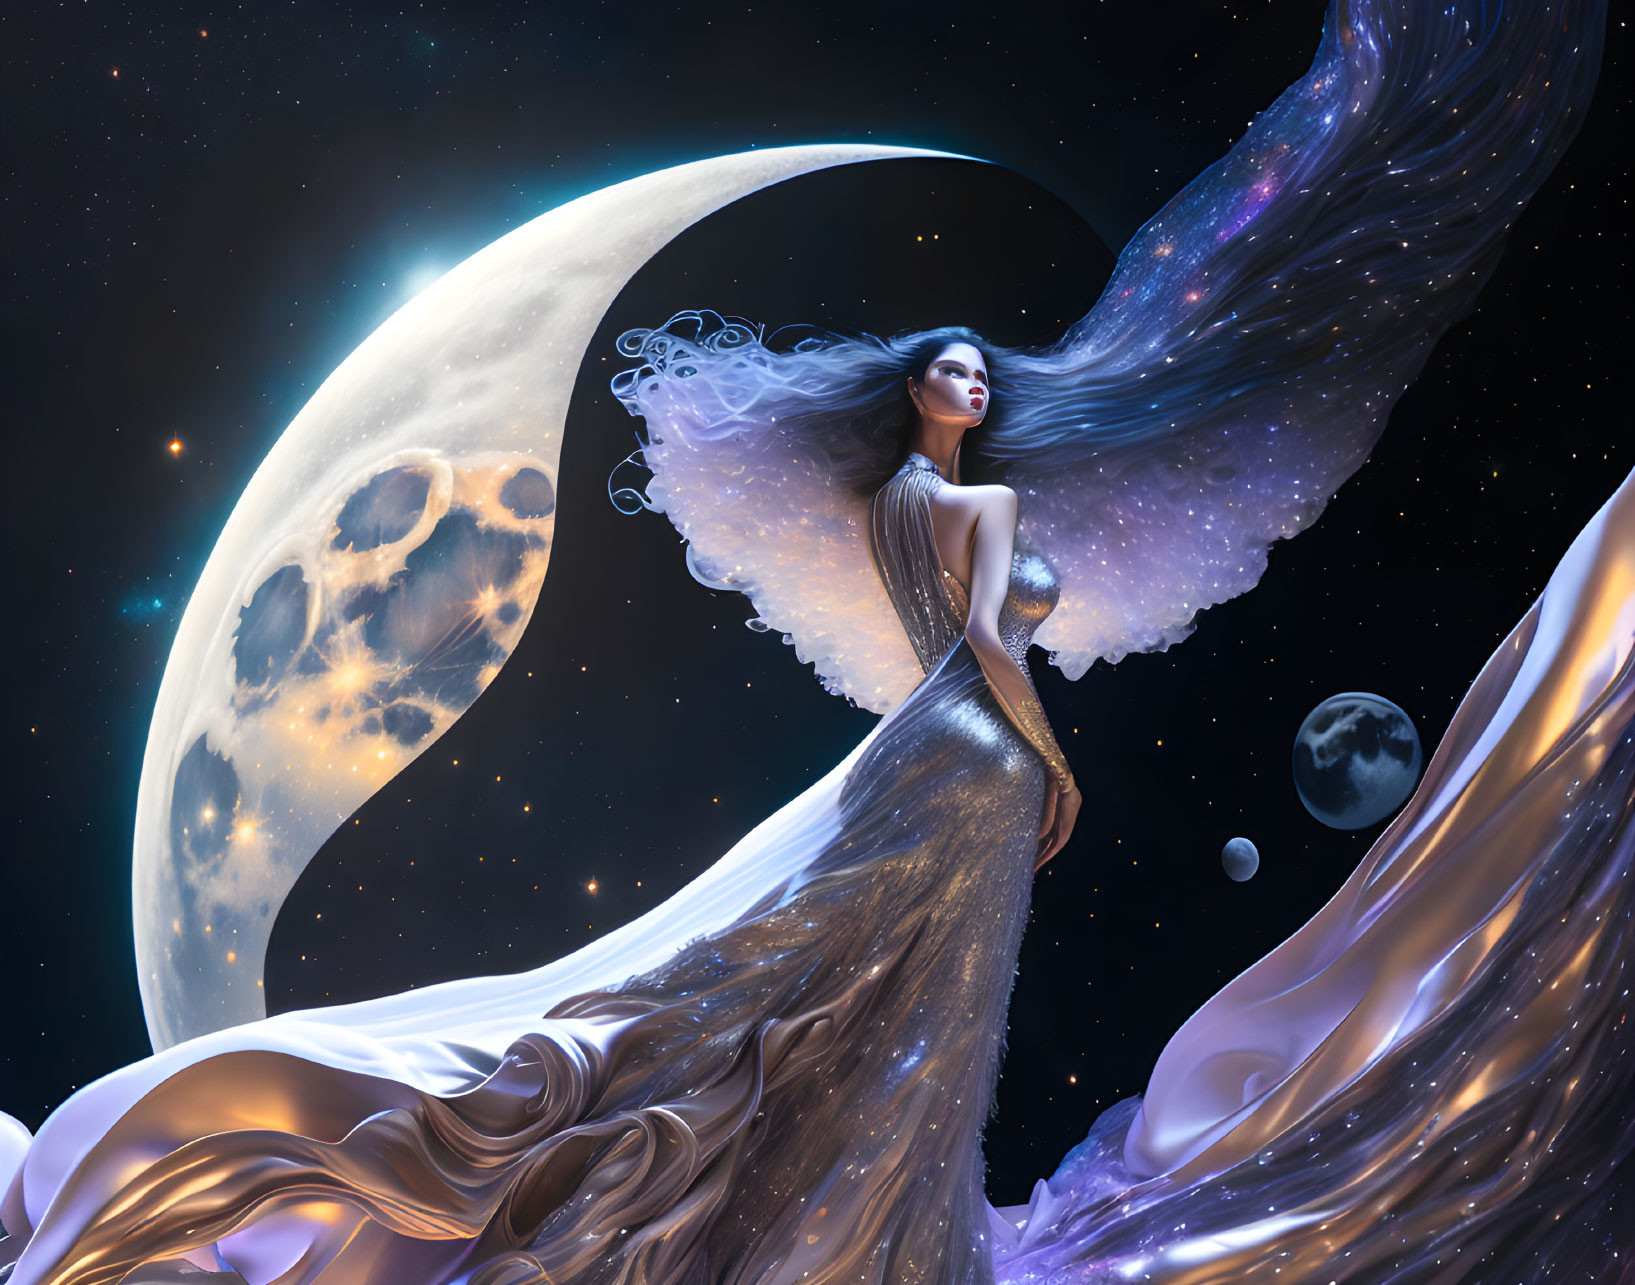 Celestial woman with flowing gown in cosmic setting